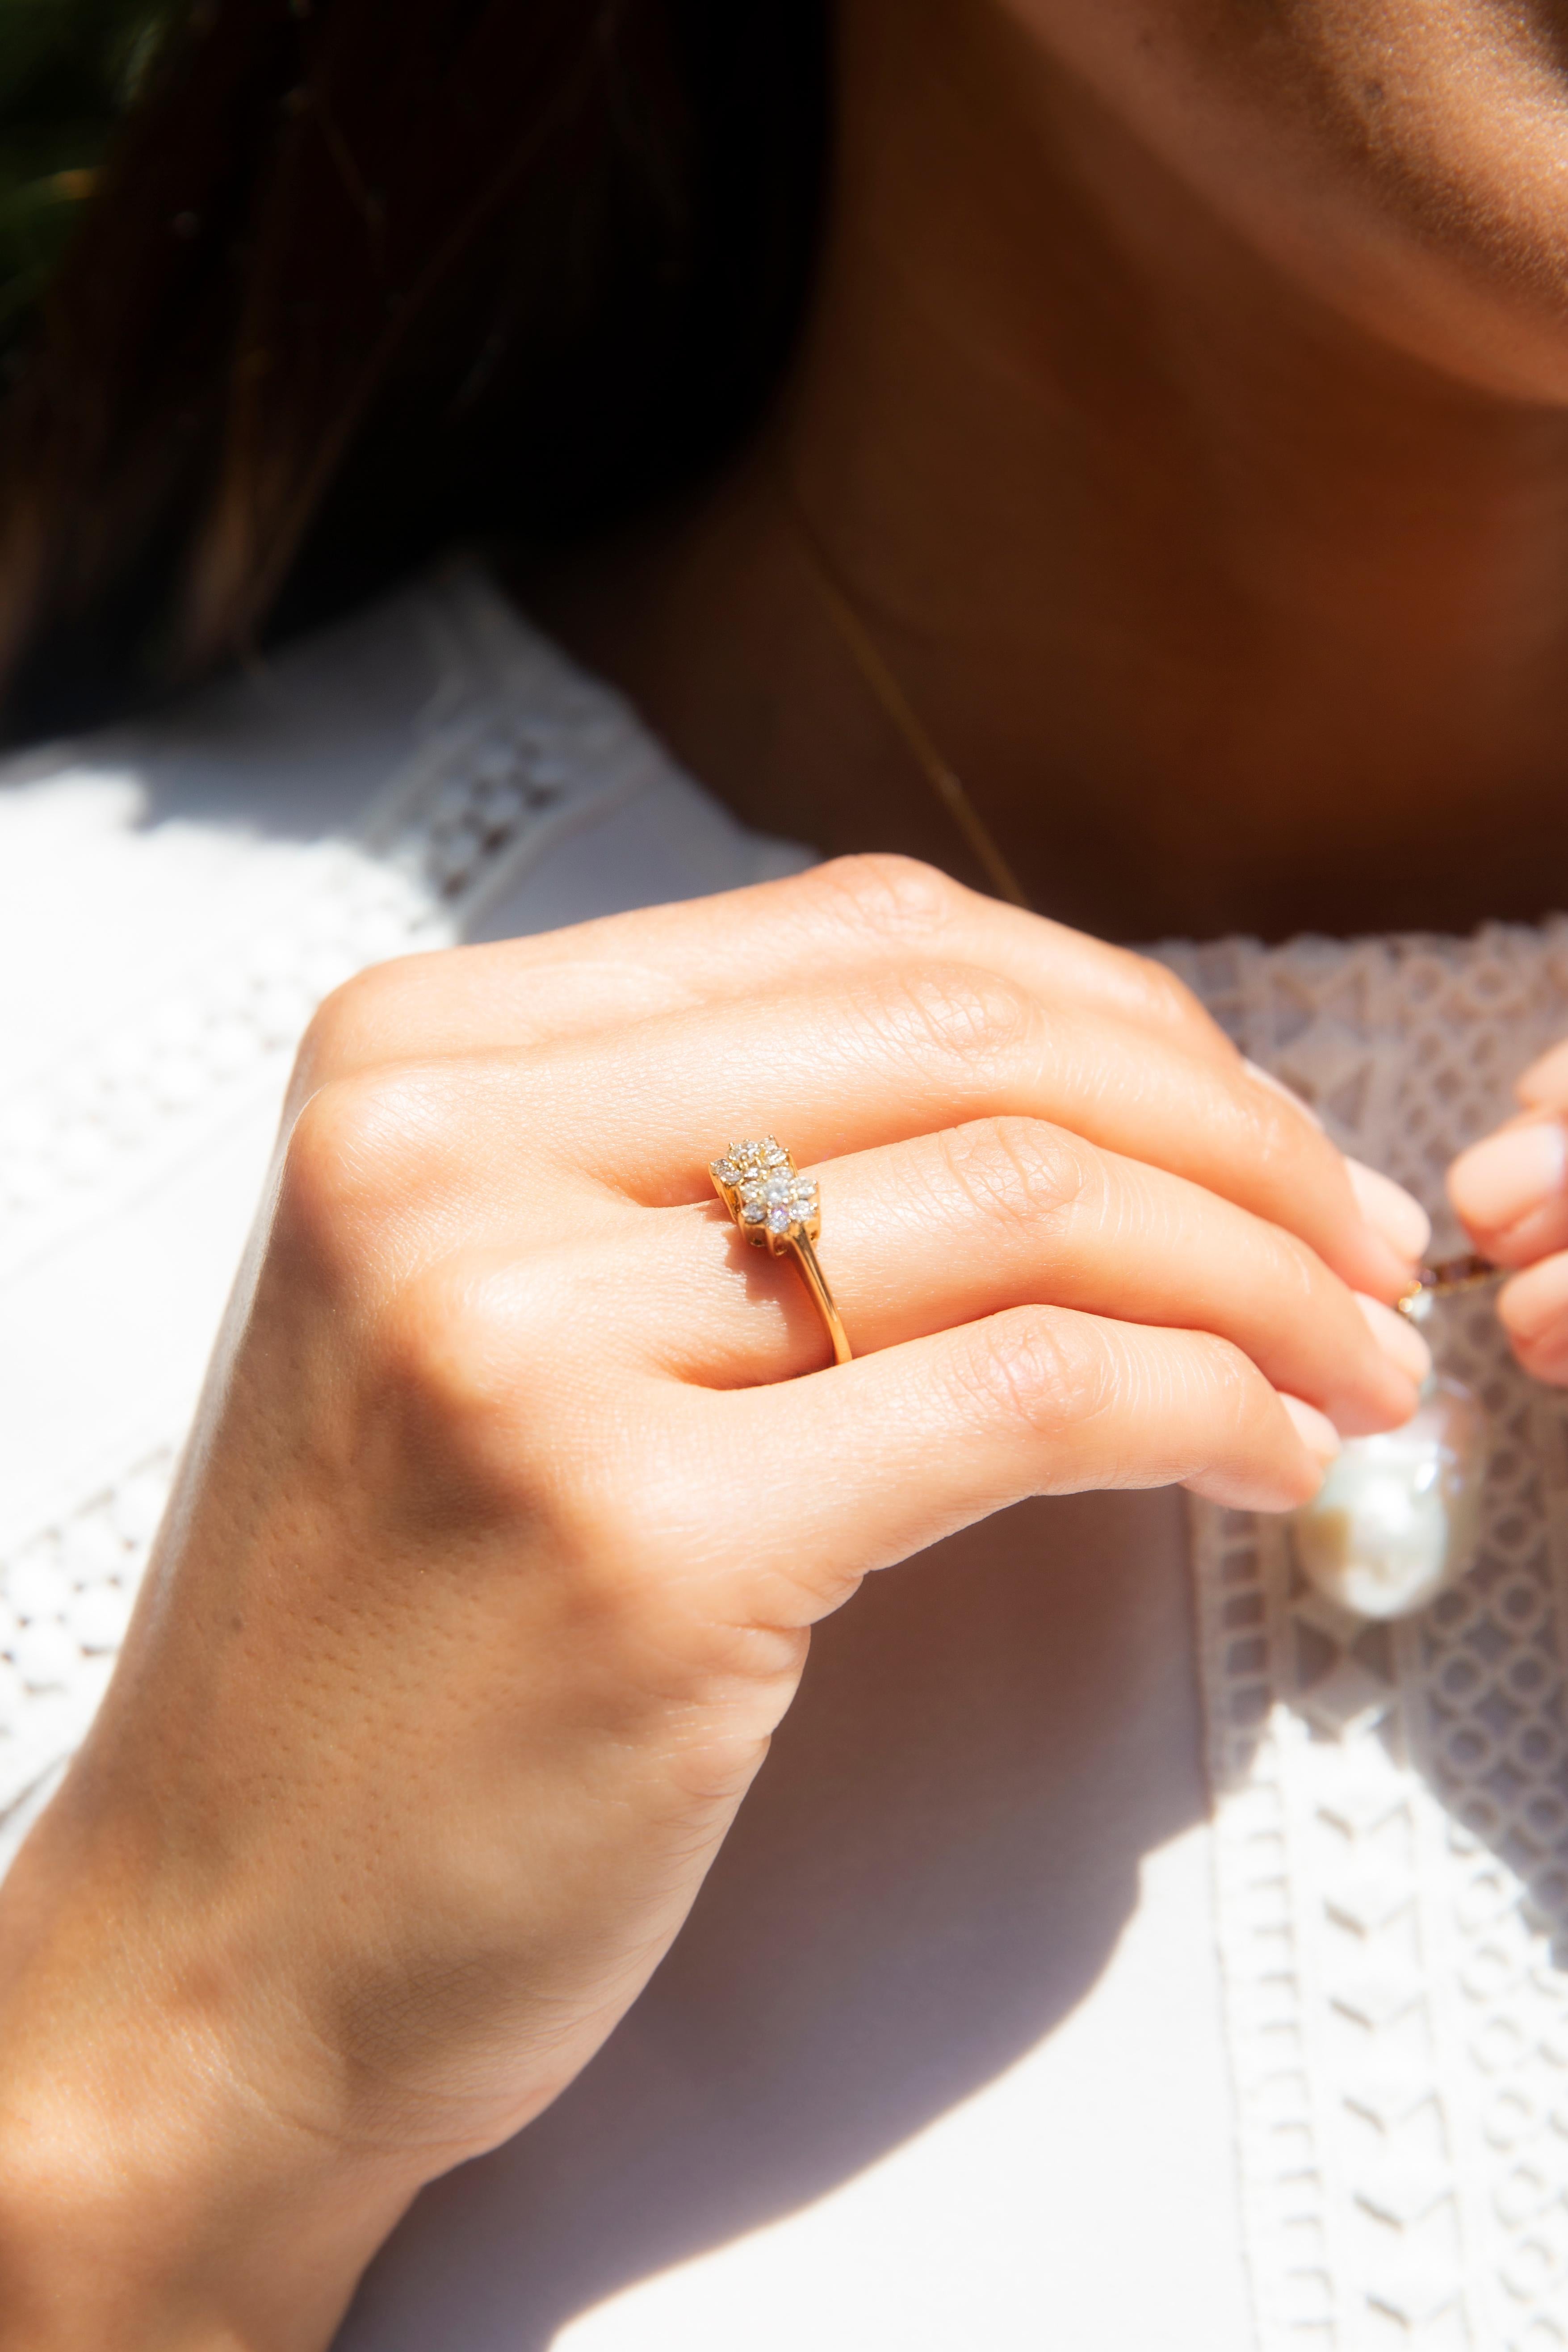 When one perfect statement of love is not enough to express eternal devotion. Sweetly crafted in 18 carat gold, The Nicole Ring is twice the sparkle, double the joy and two times the charm. Her bouquet of two is for you and yours.

The Nicole Ring